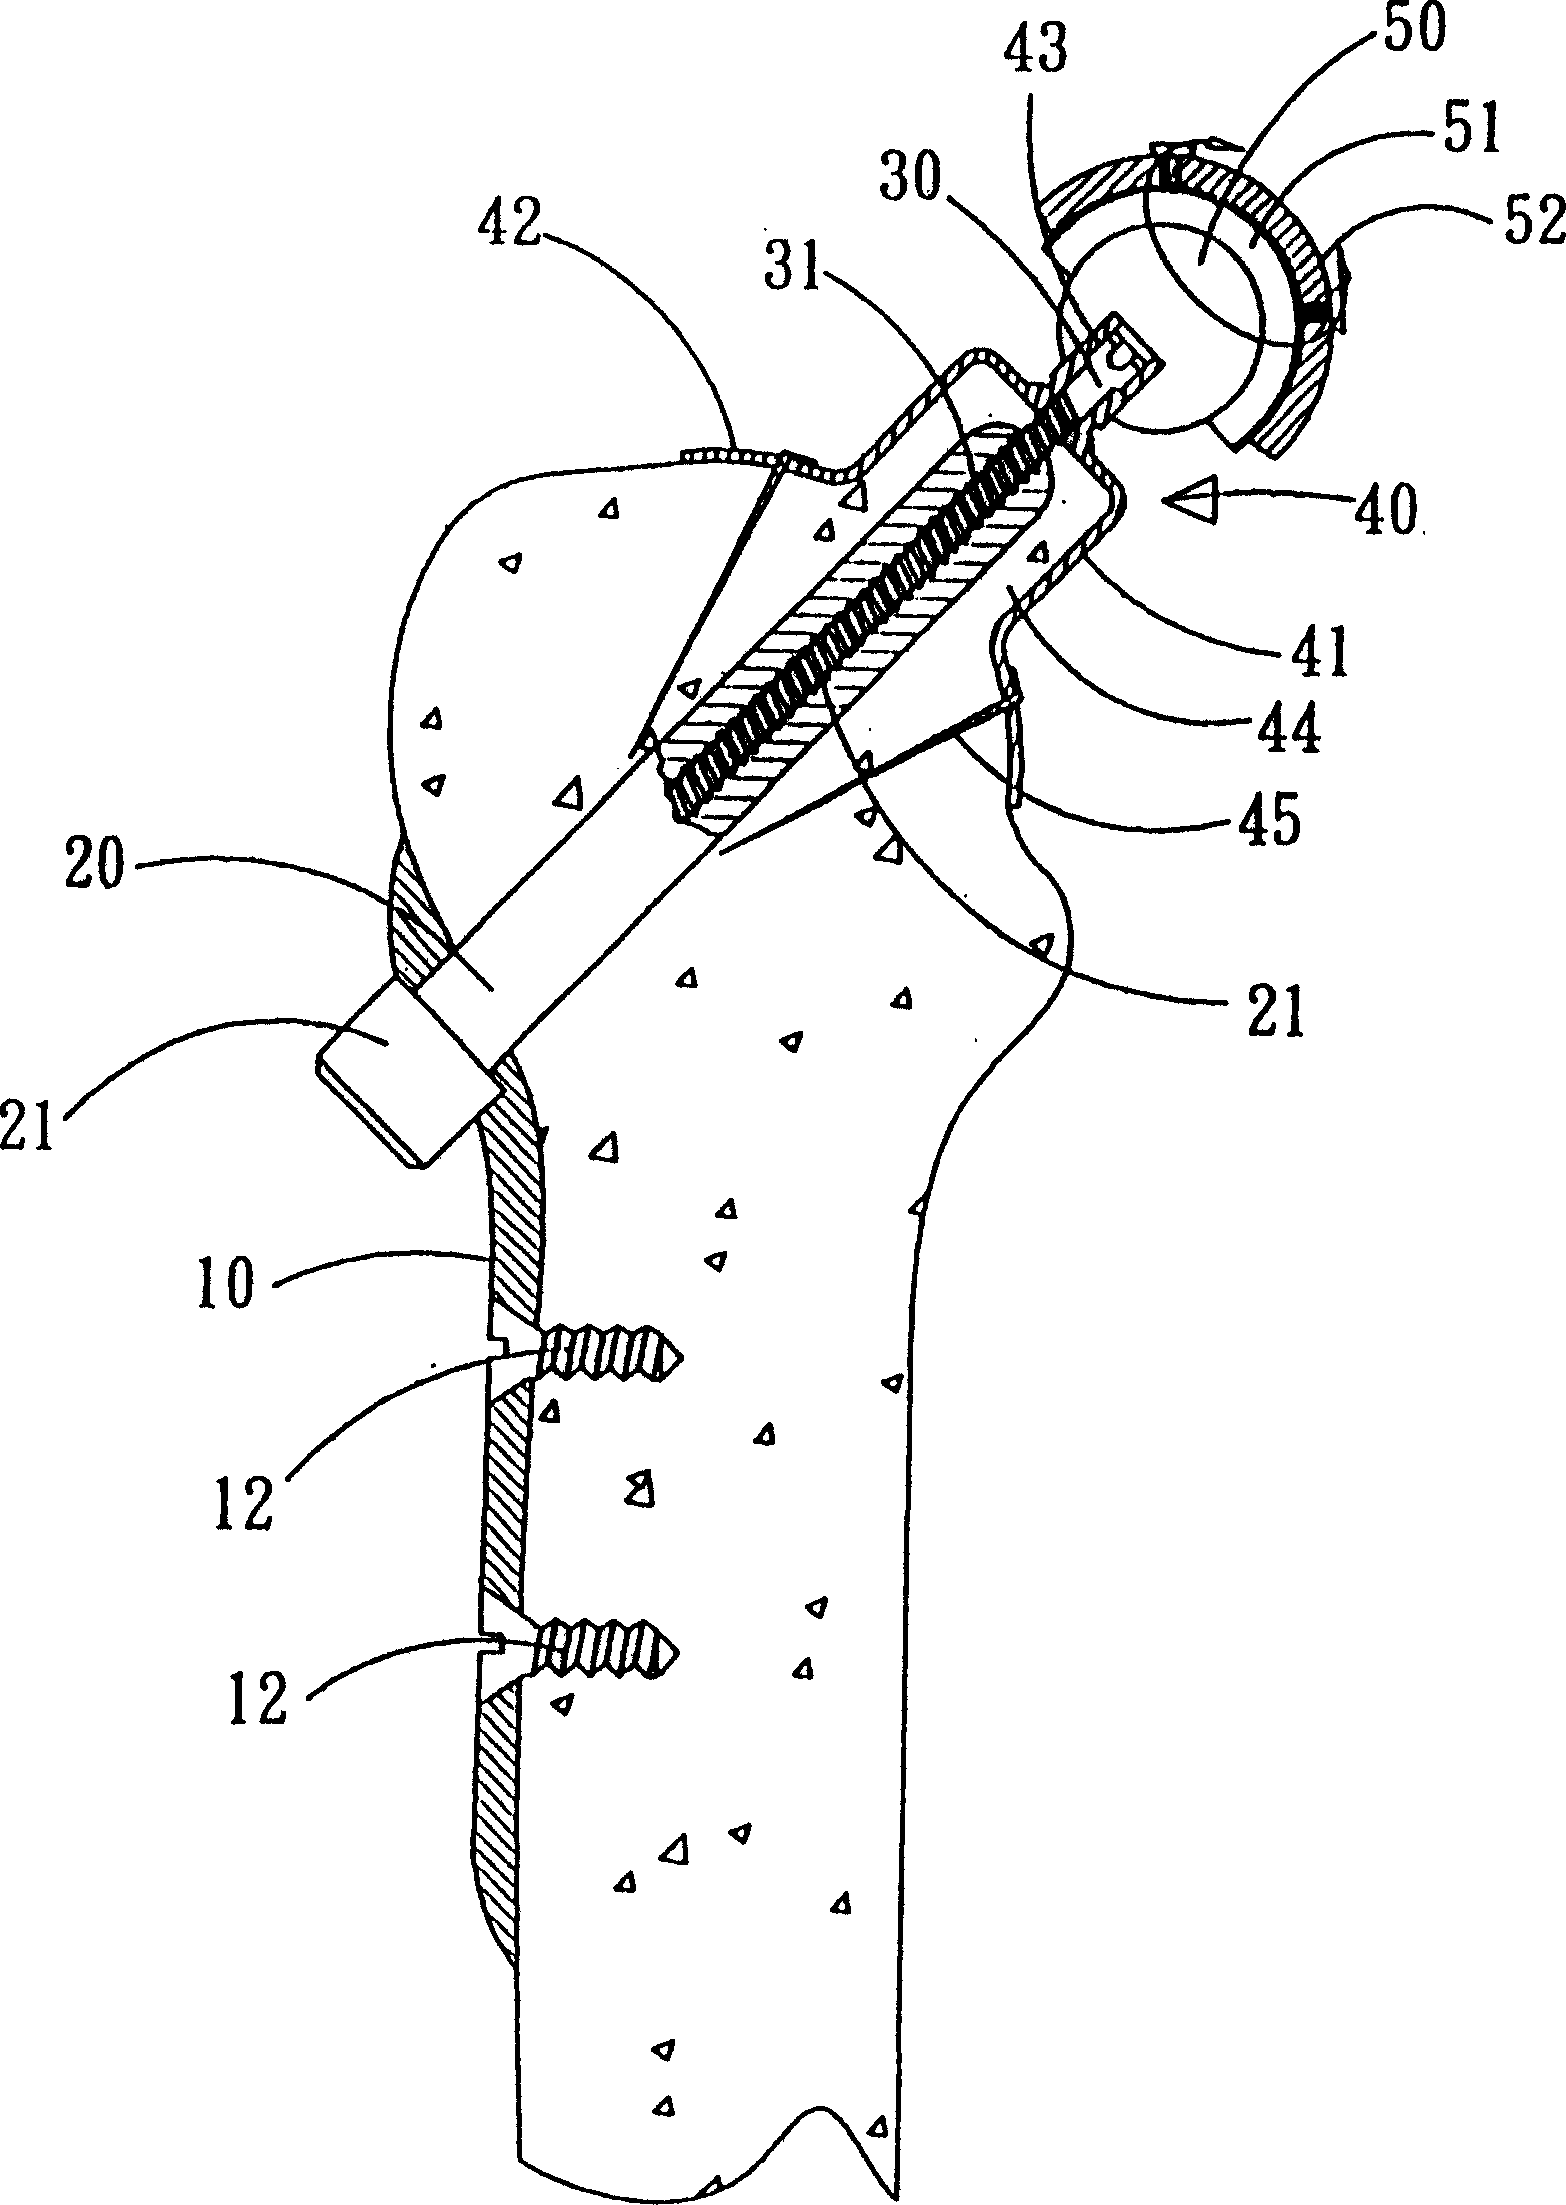 Artificial hip joint device without handle